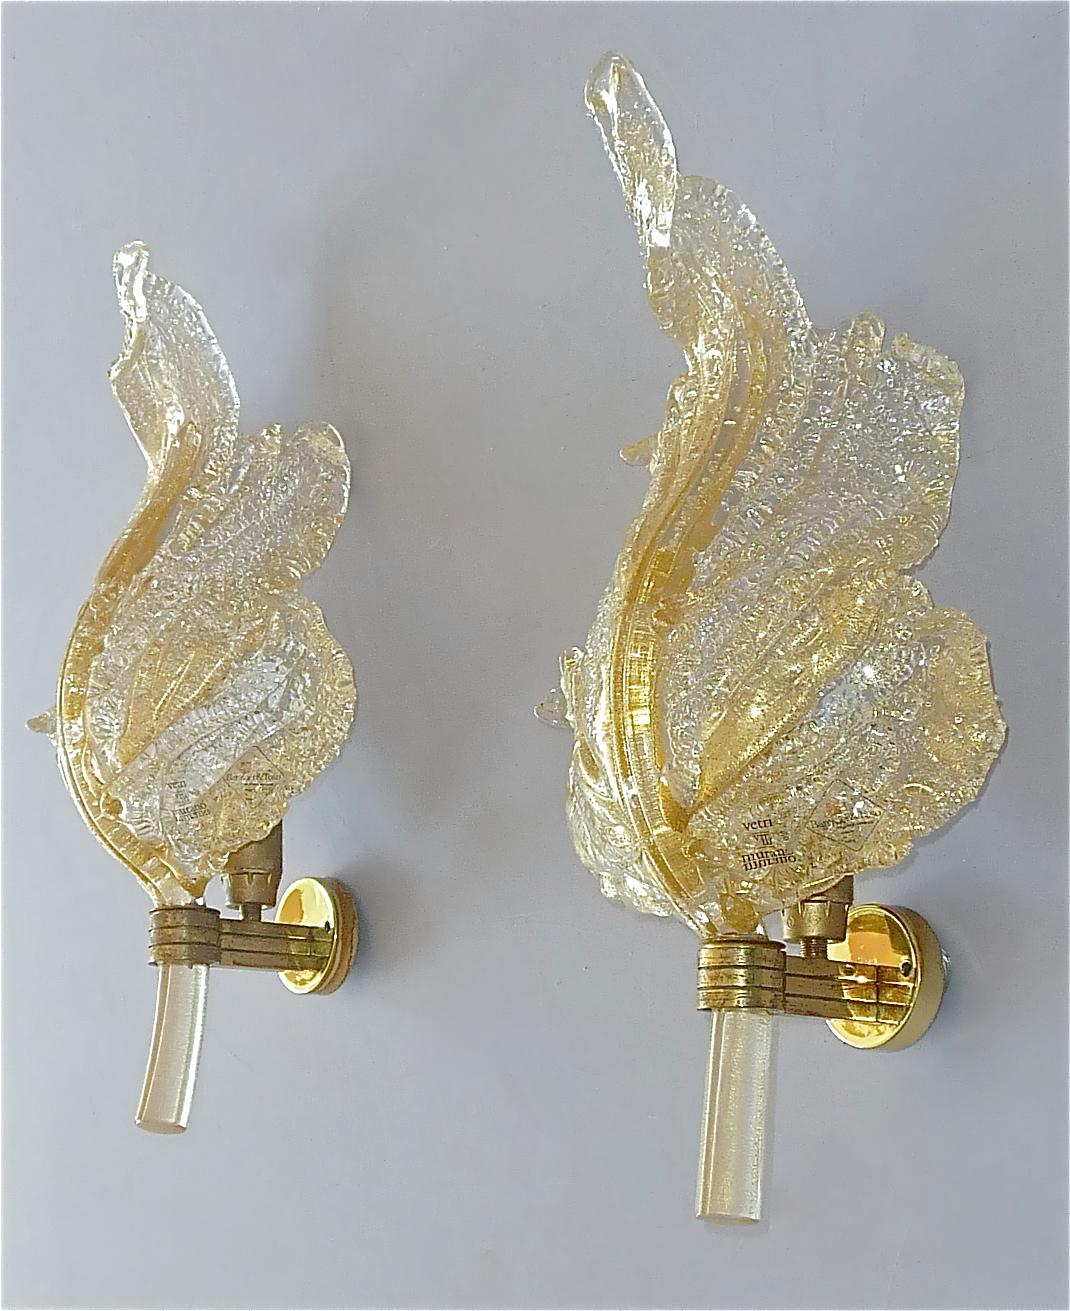 Large Signed Pair Barovier & Toso Leaf Sconces Italian Murano Glass Floral 1970s For Sale 6